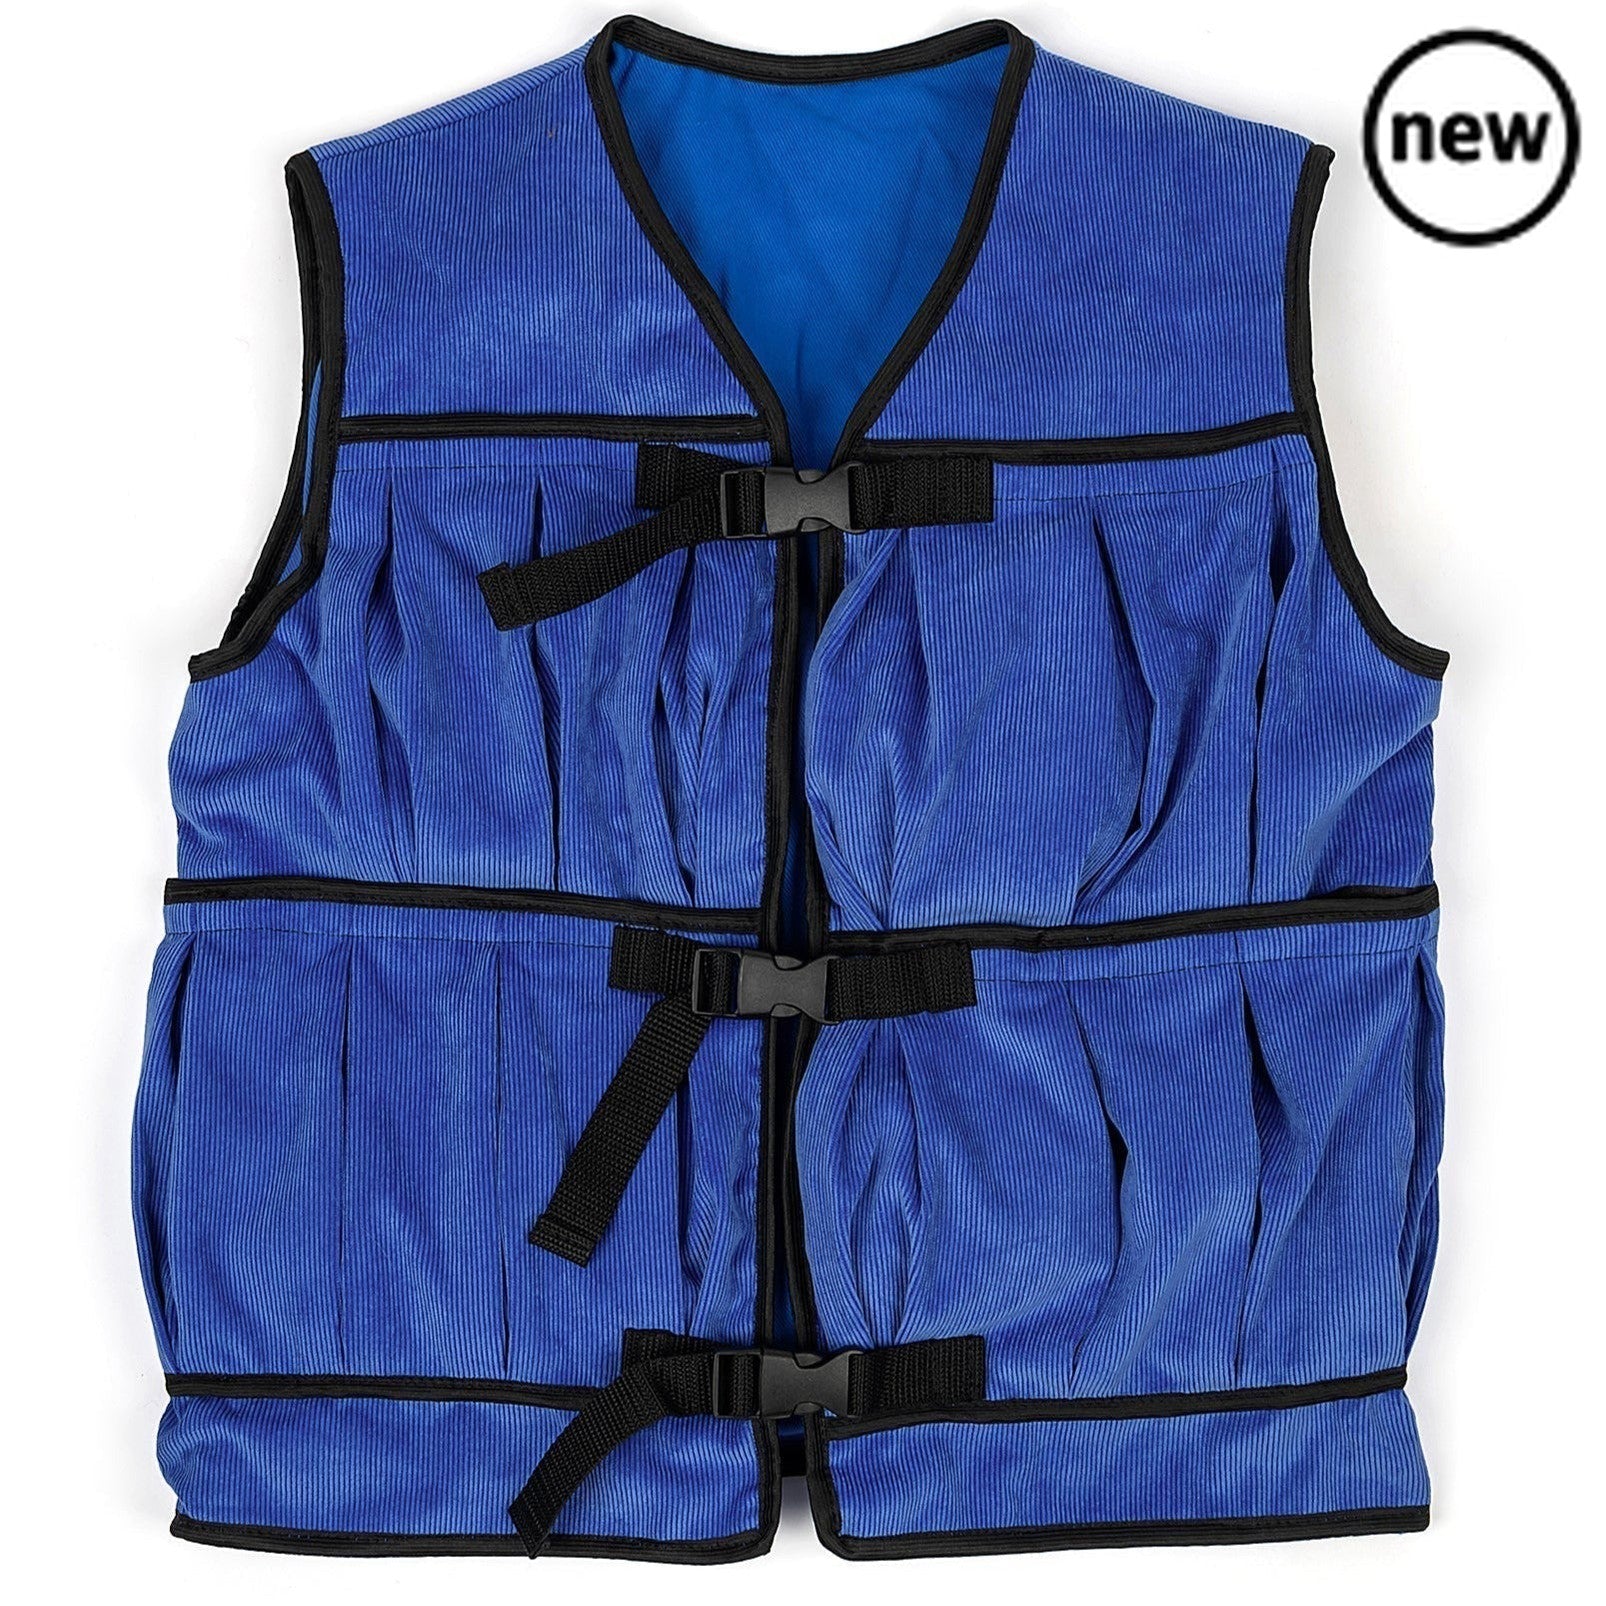 OT Weighted Therapy Vest, Introducing our OT Weighted Therapy Vest – a versatile solution designed for multiple users where quick and easy switches are essential. Crafted to accommodate various needs, this vest features large and capacious outer pockets, allowing for a heavier load and complete with large clip fasteners for hassle-free use. Key Features: Switch with Ease: This vest is designed for situations where quick transitions between participants are required. The easy-to-use clip fasteners ensure a s